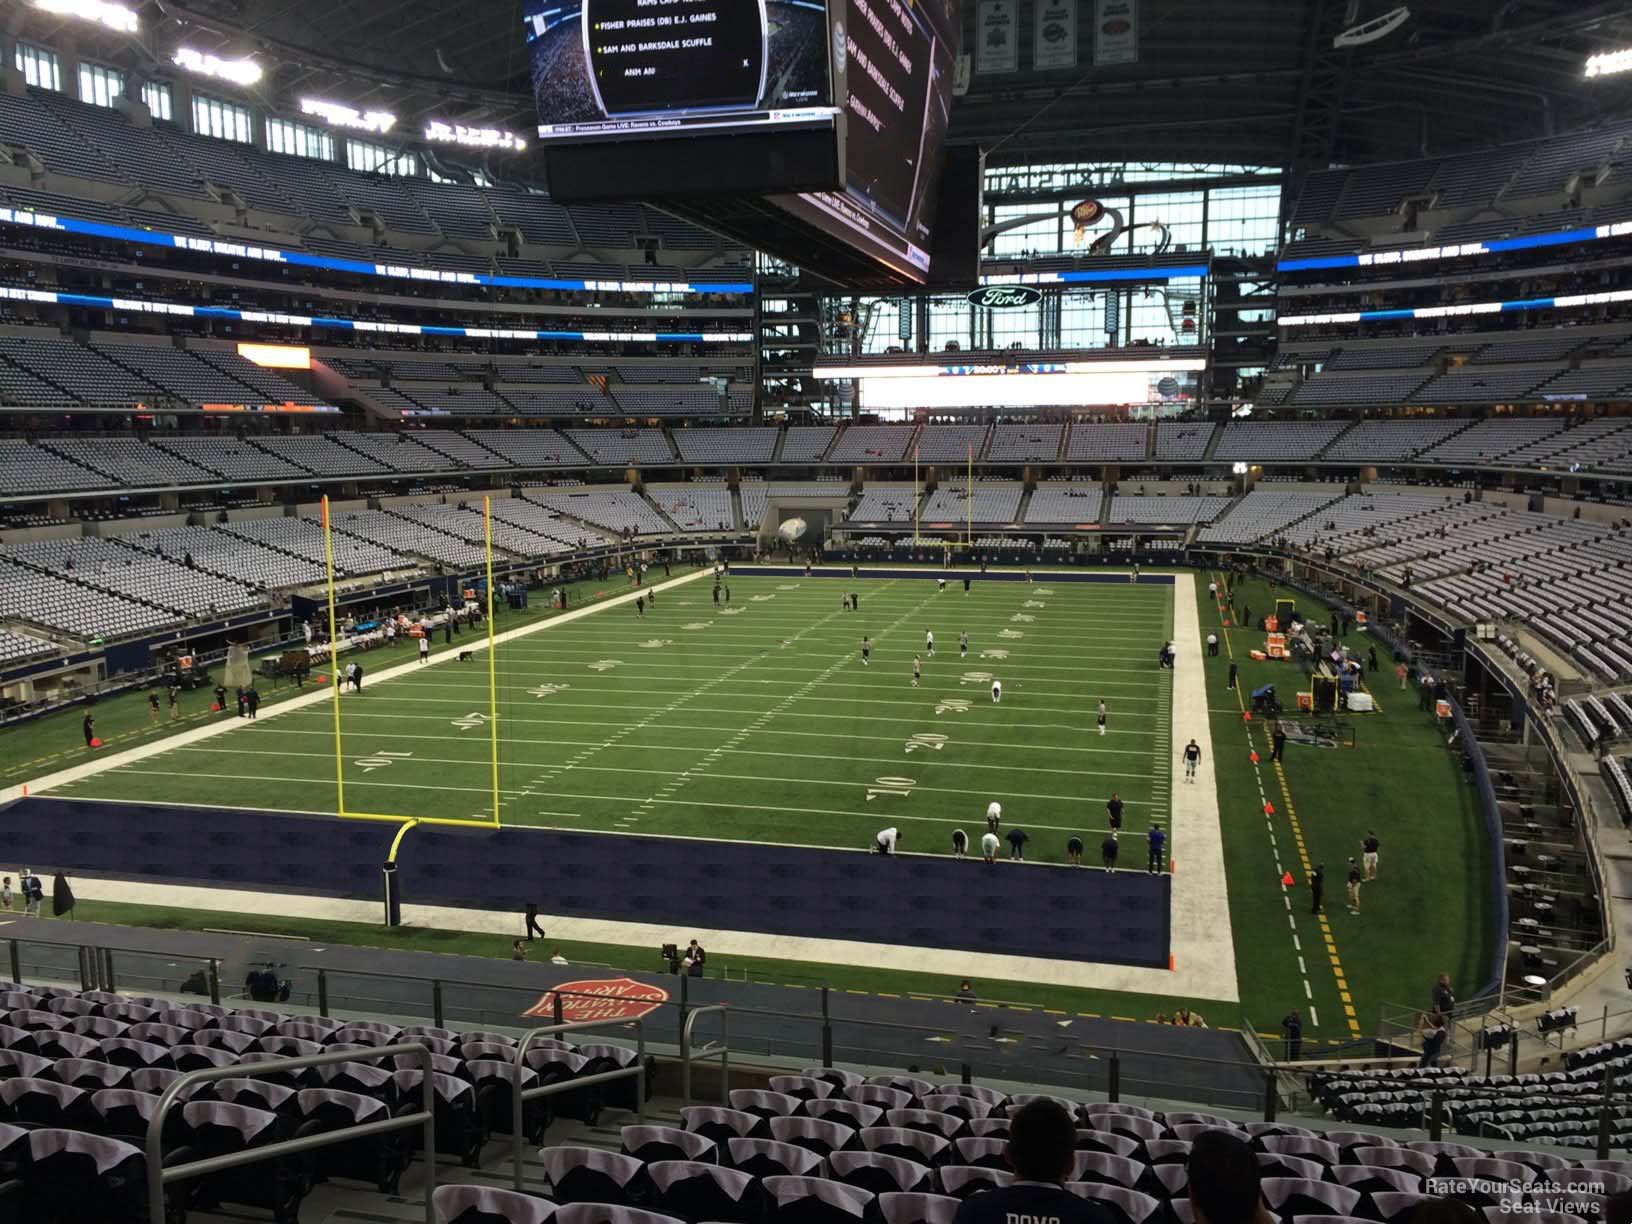 section 220, row 13 seat view  for football - at&t stadium (cowboys stadium)